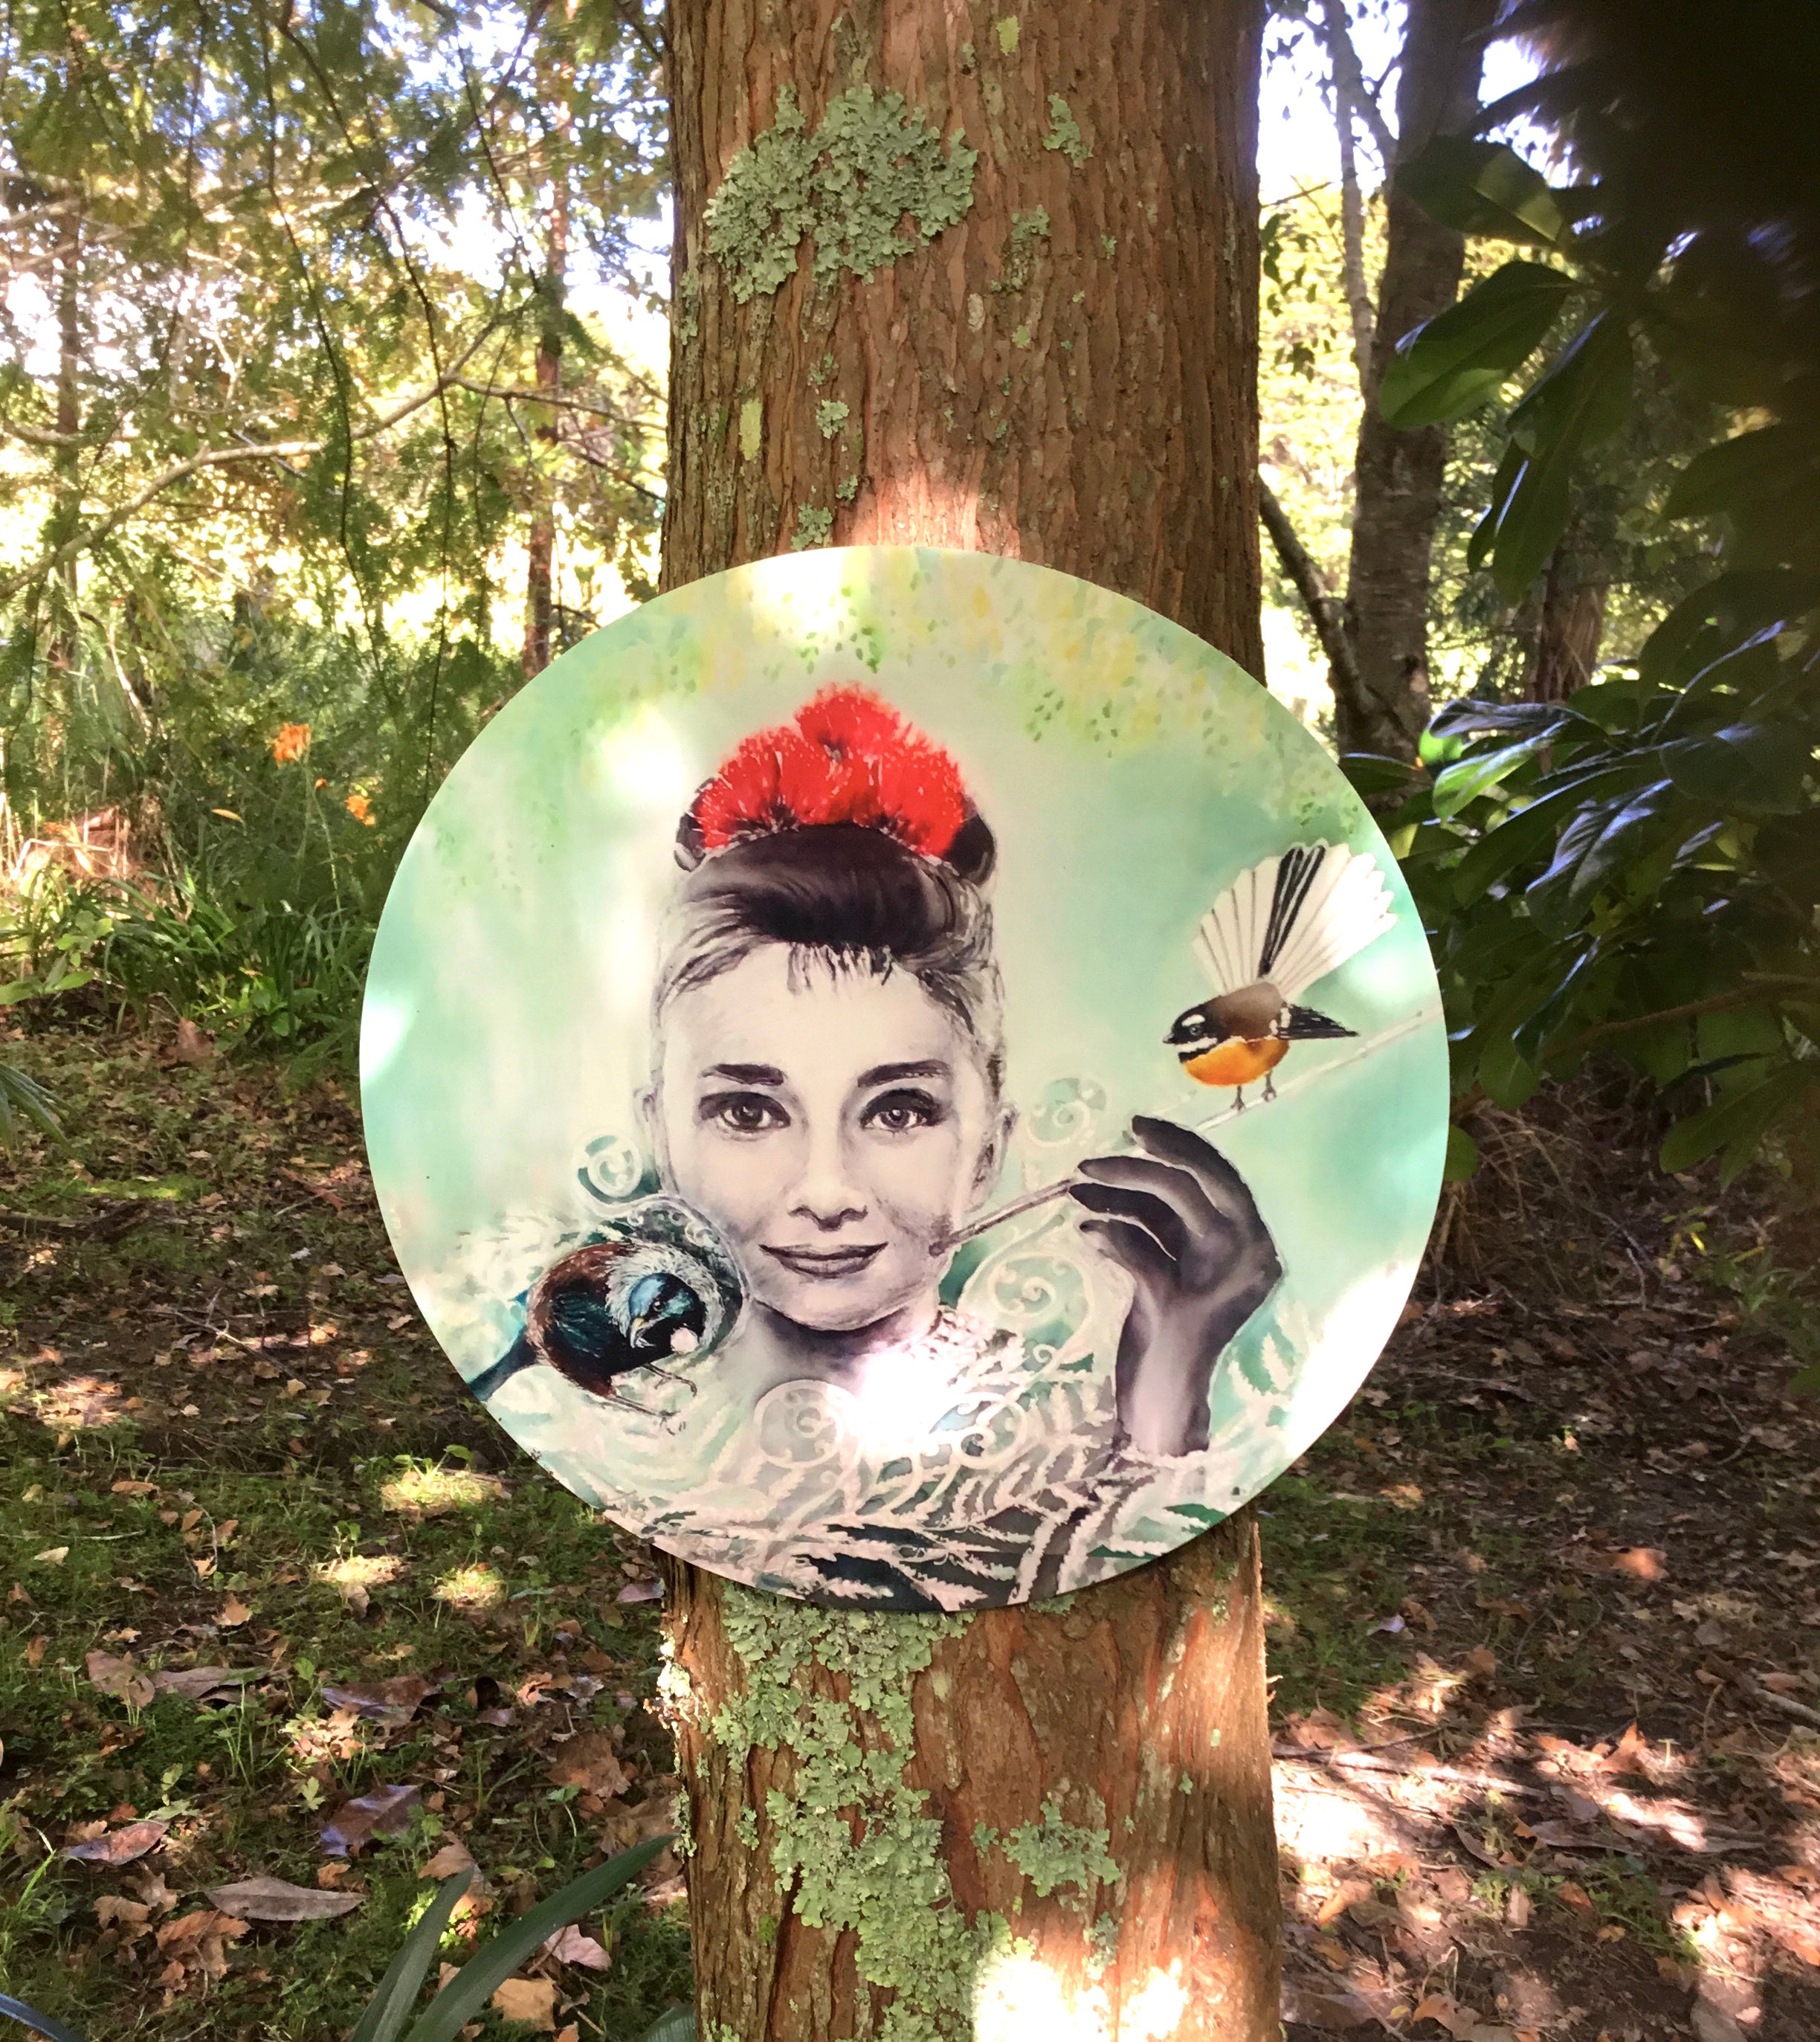 Audrey Portrait painting with Tui and Fantail  - Outdoor Garden Art Panel